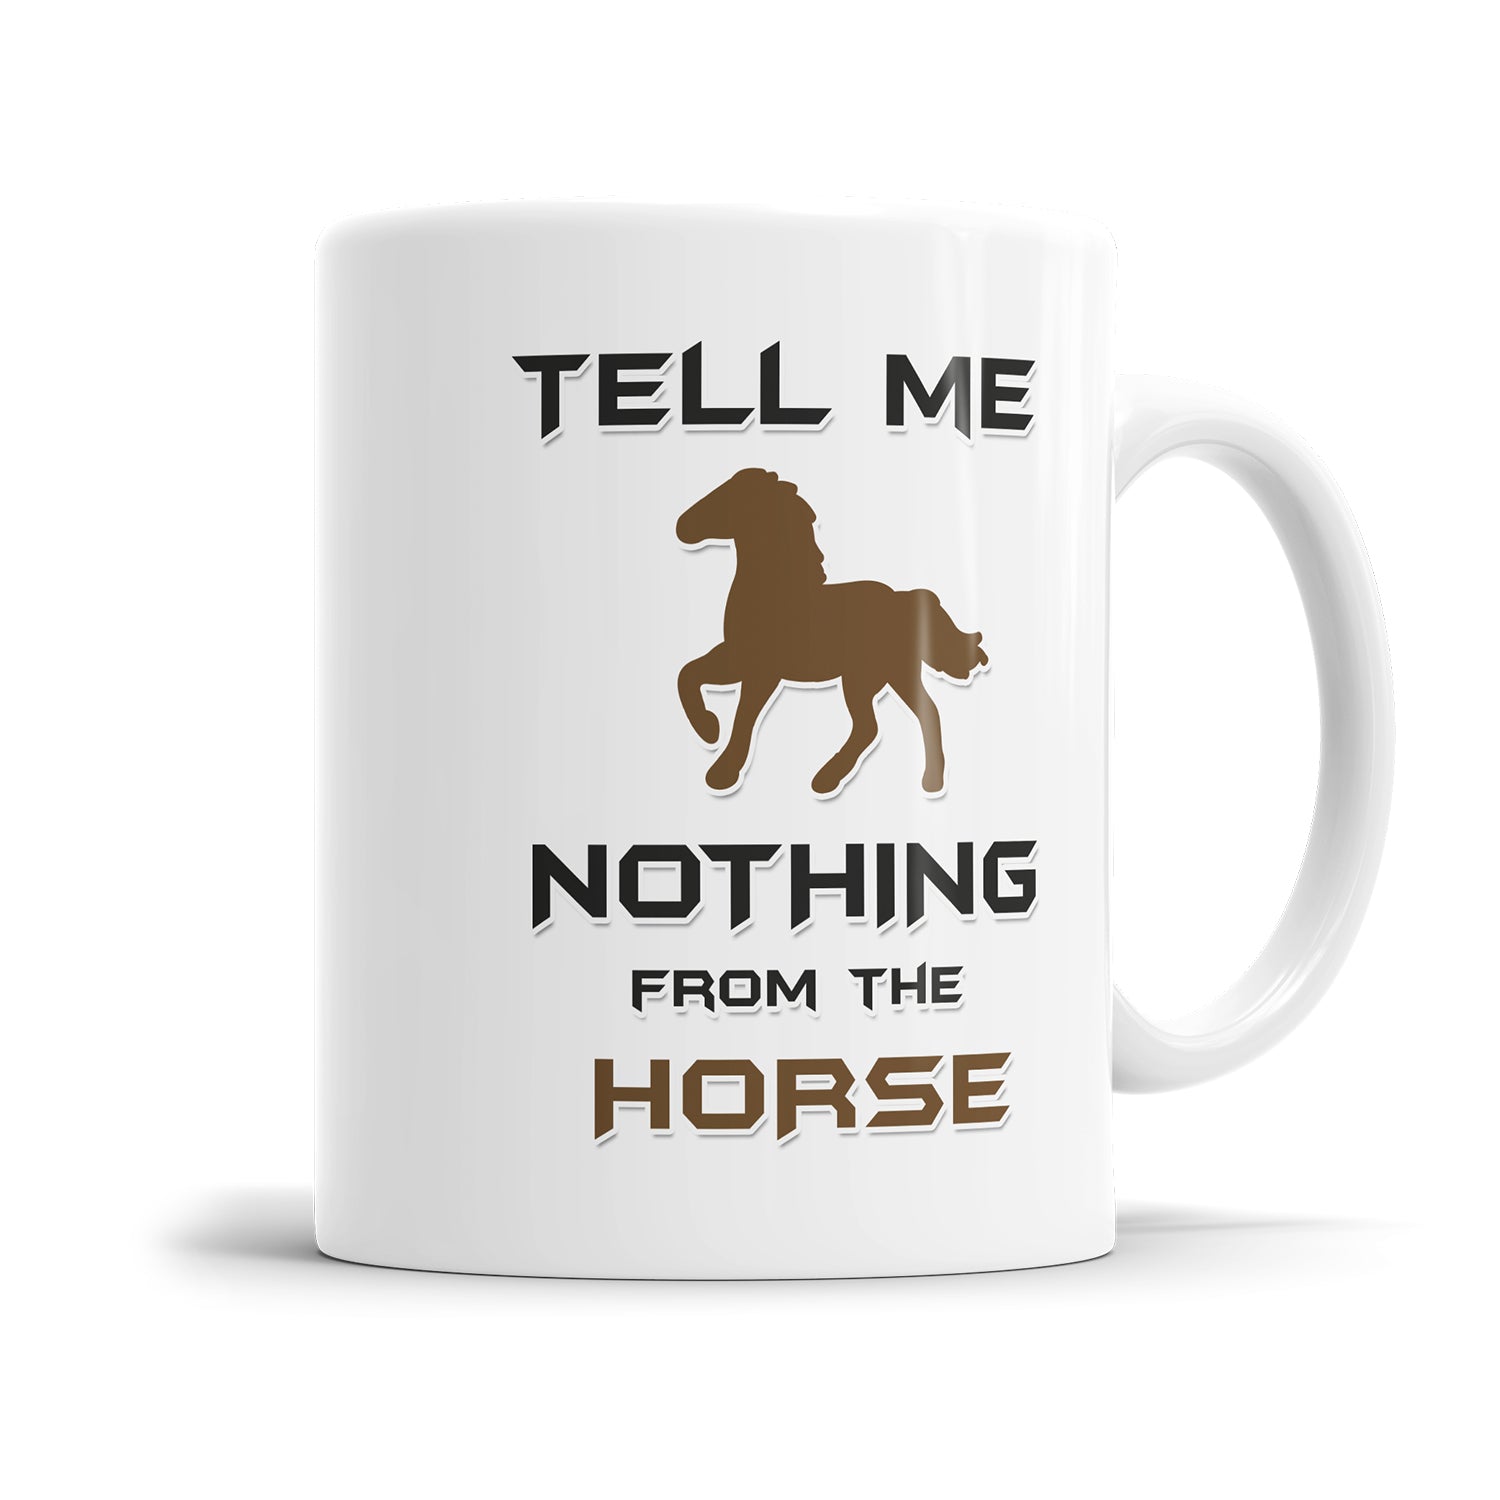 Tell me nothing from the Horse Tasse mit Spruch Denglish Fulima